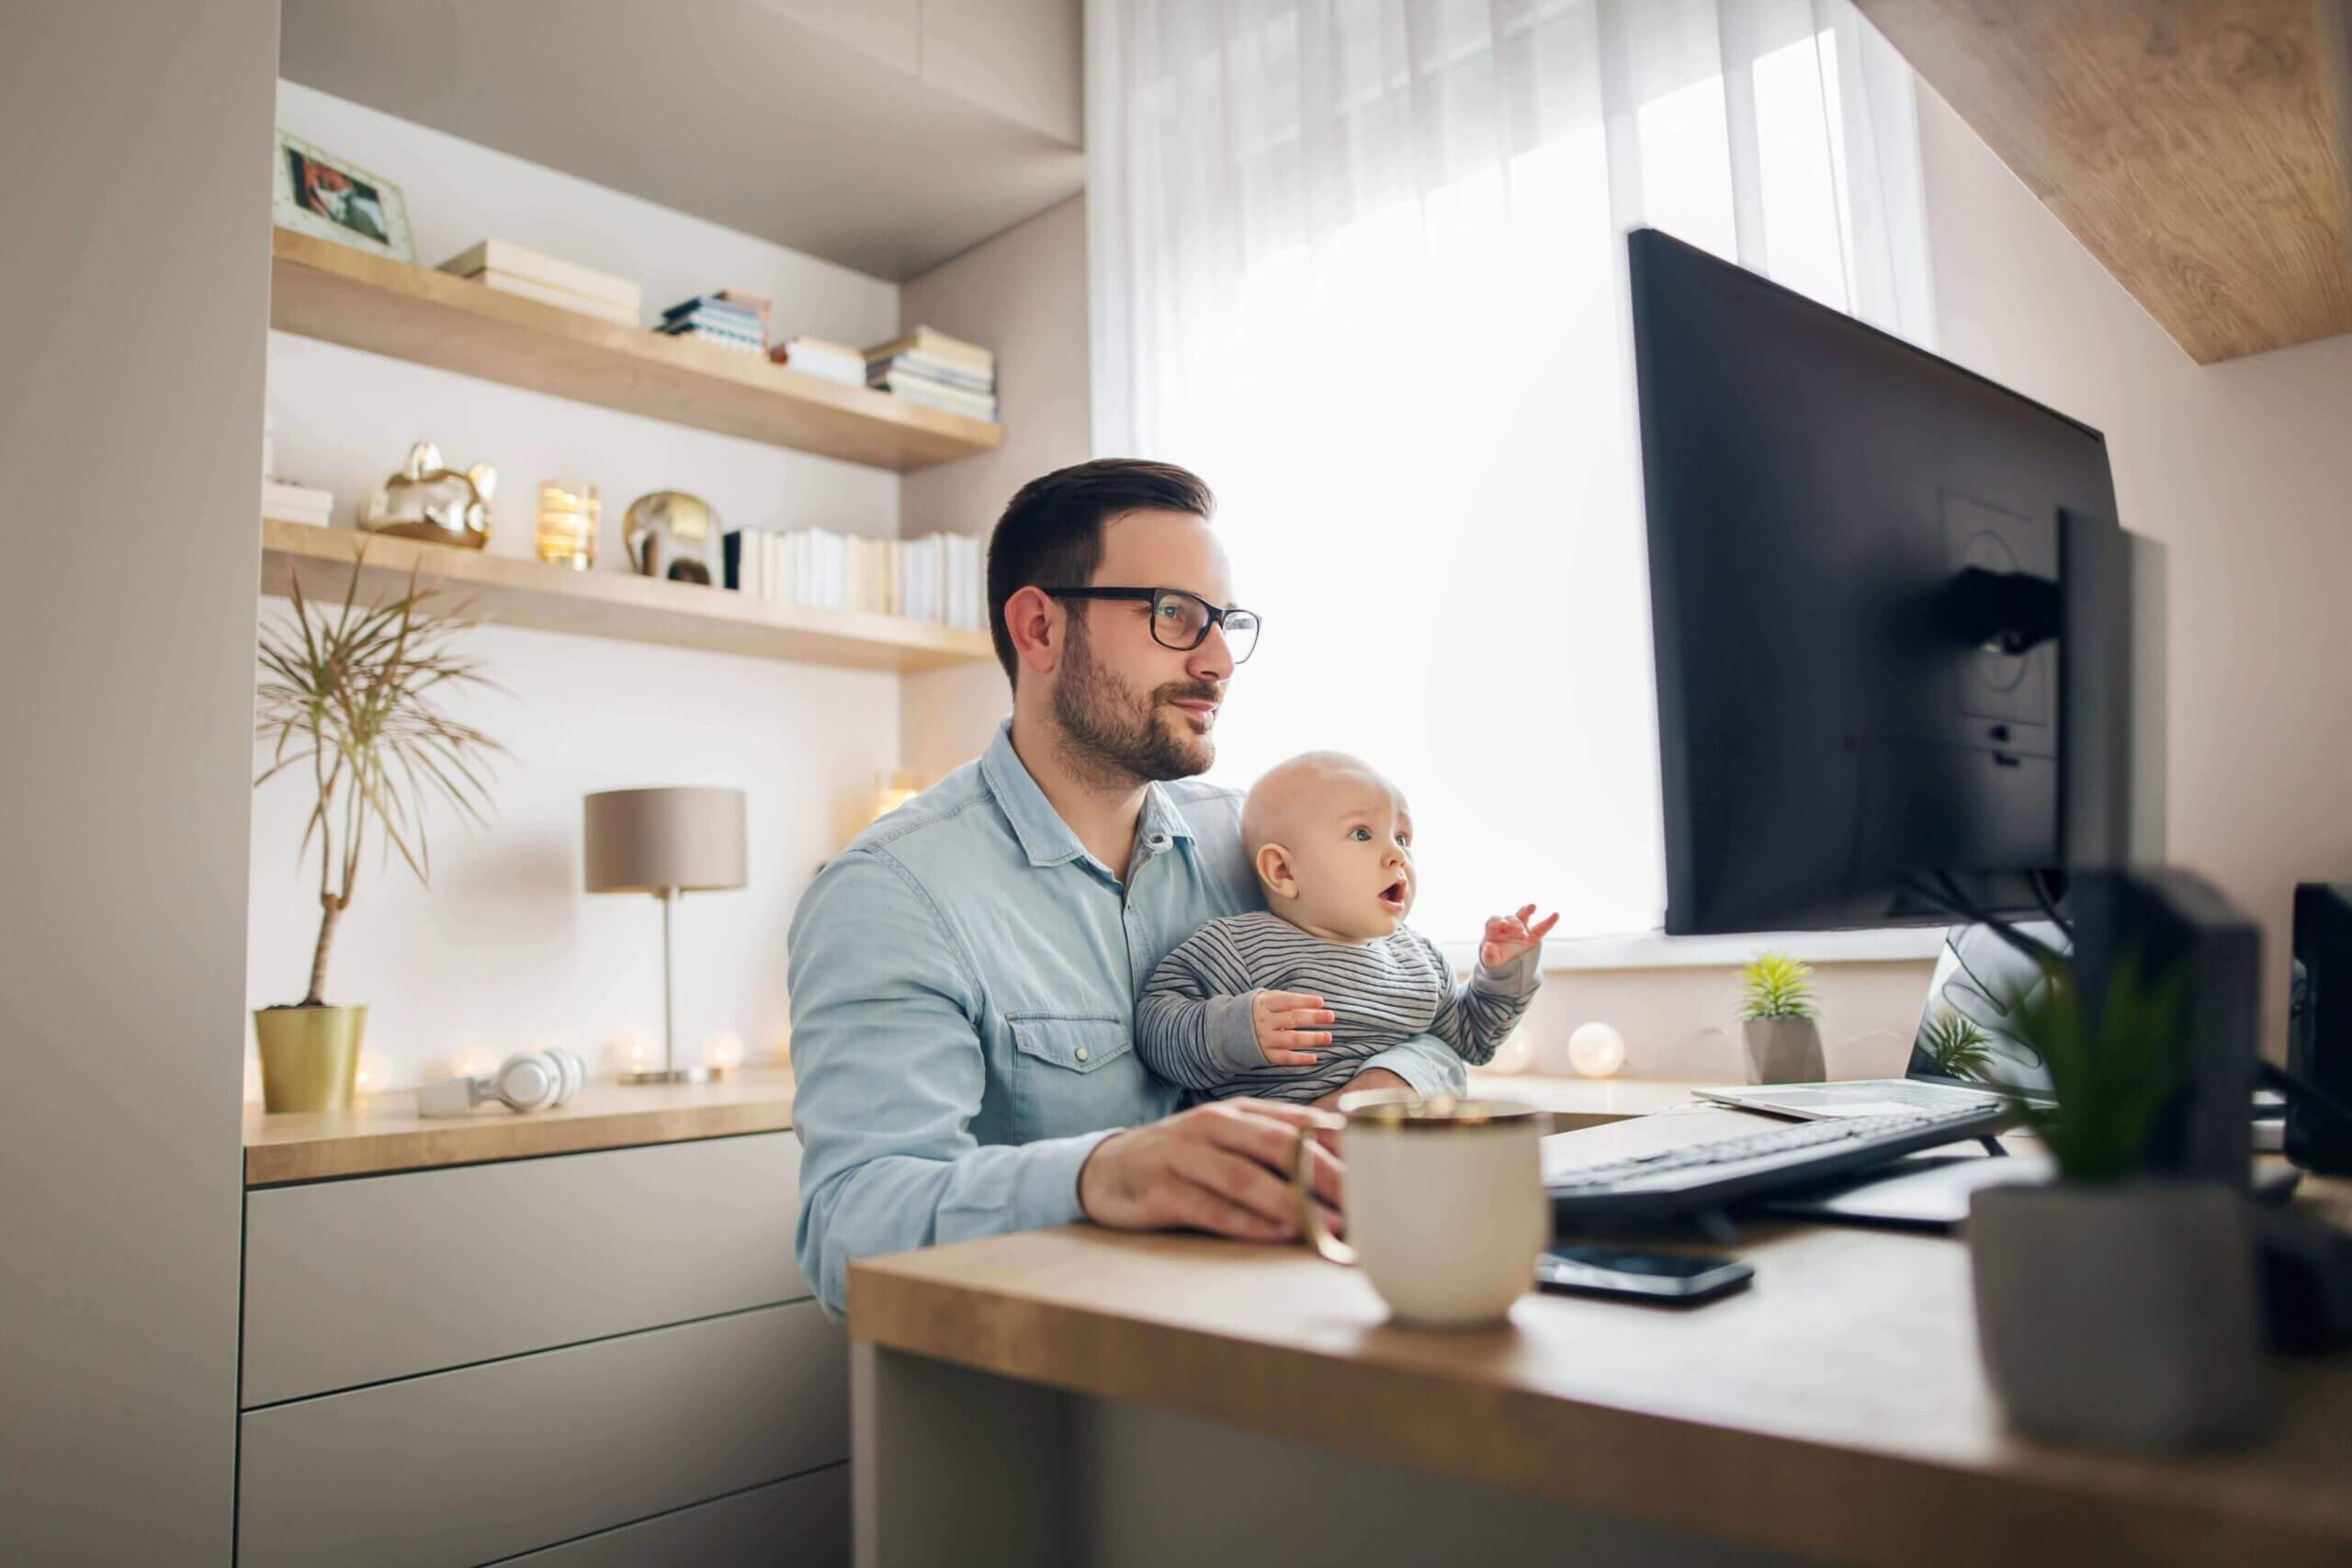 A Man holding baby and working at home.